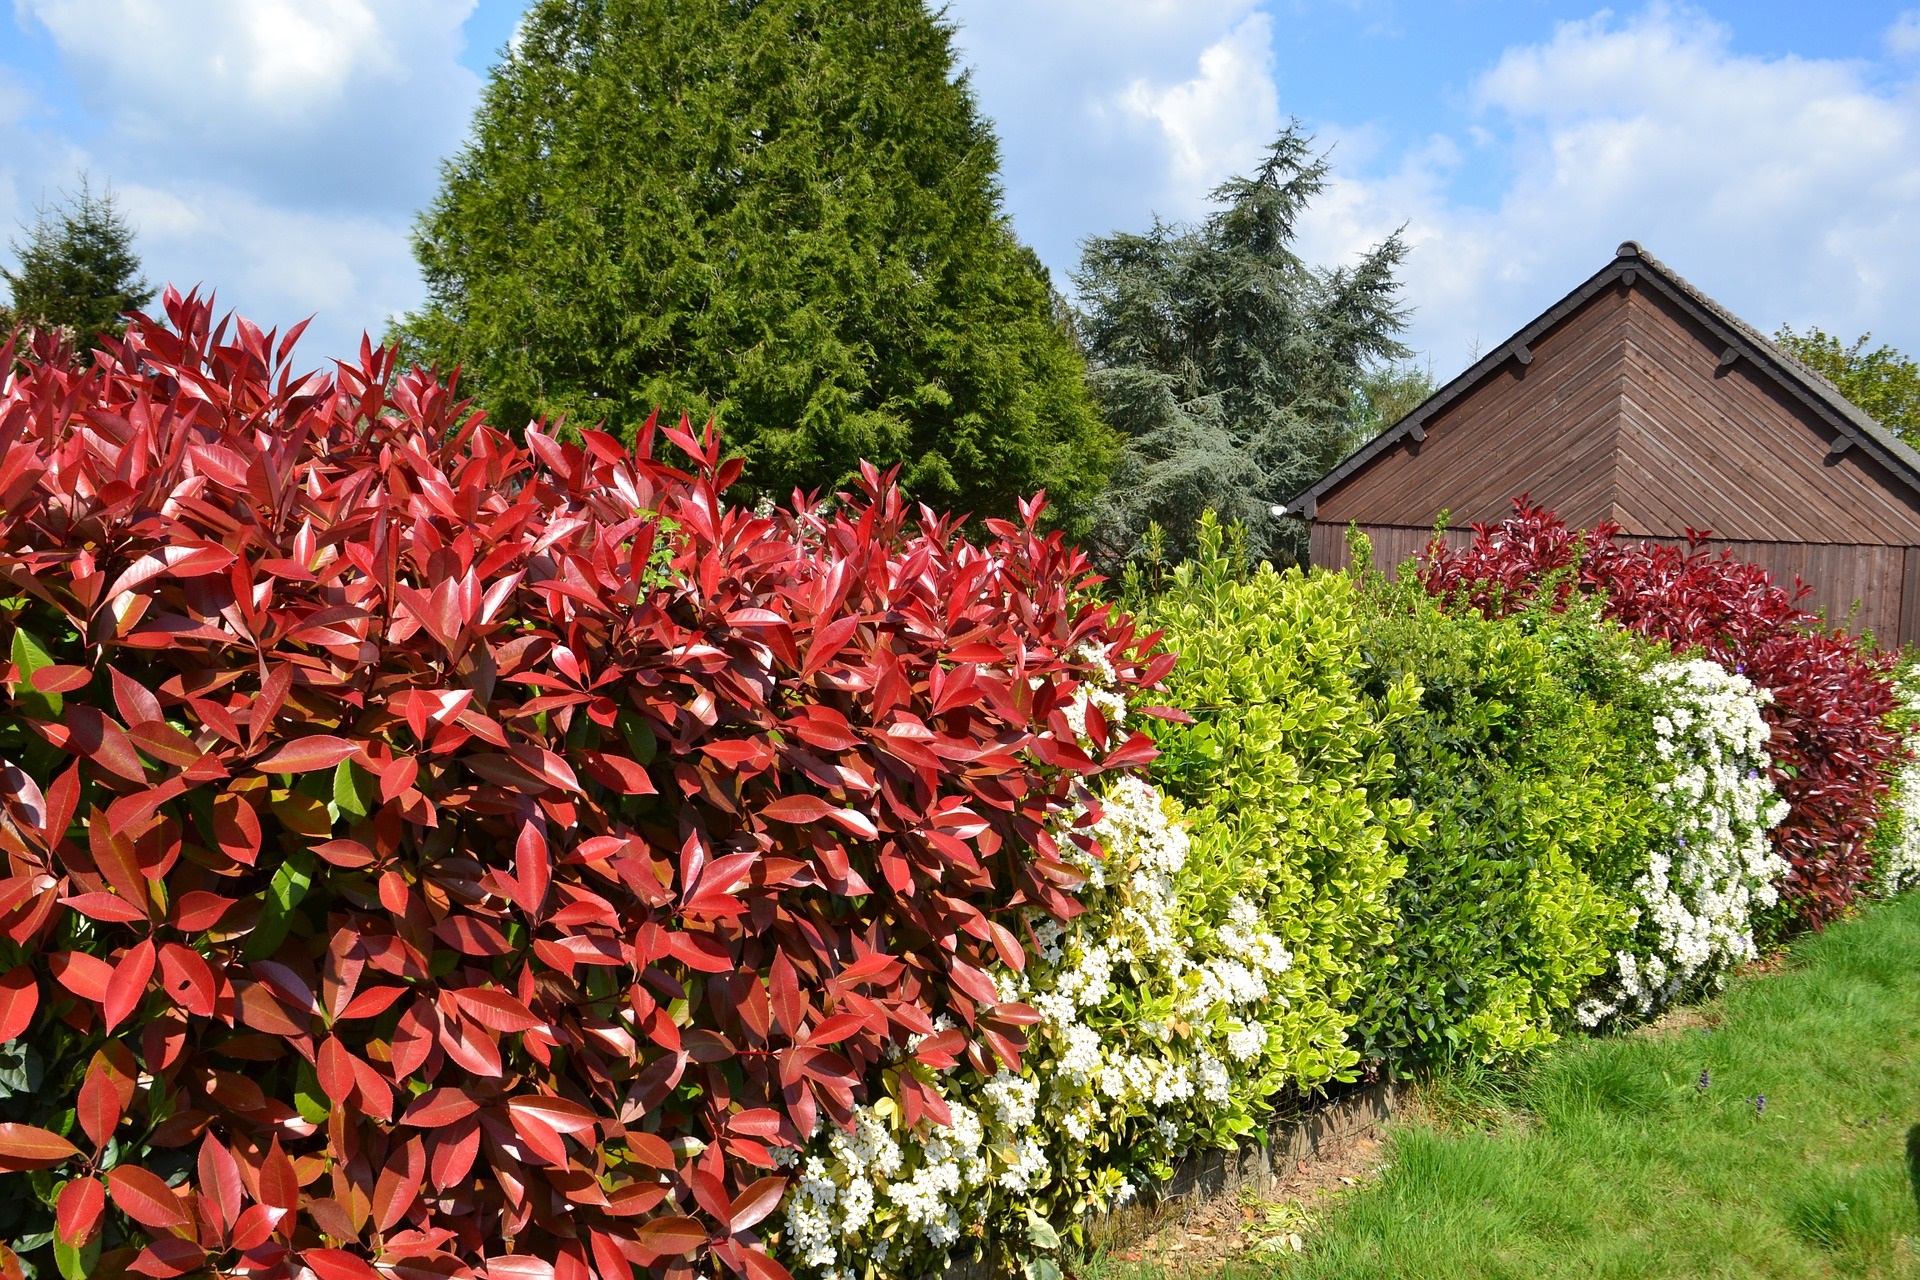 A mixed hedge using evergreen plants